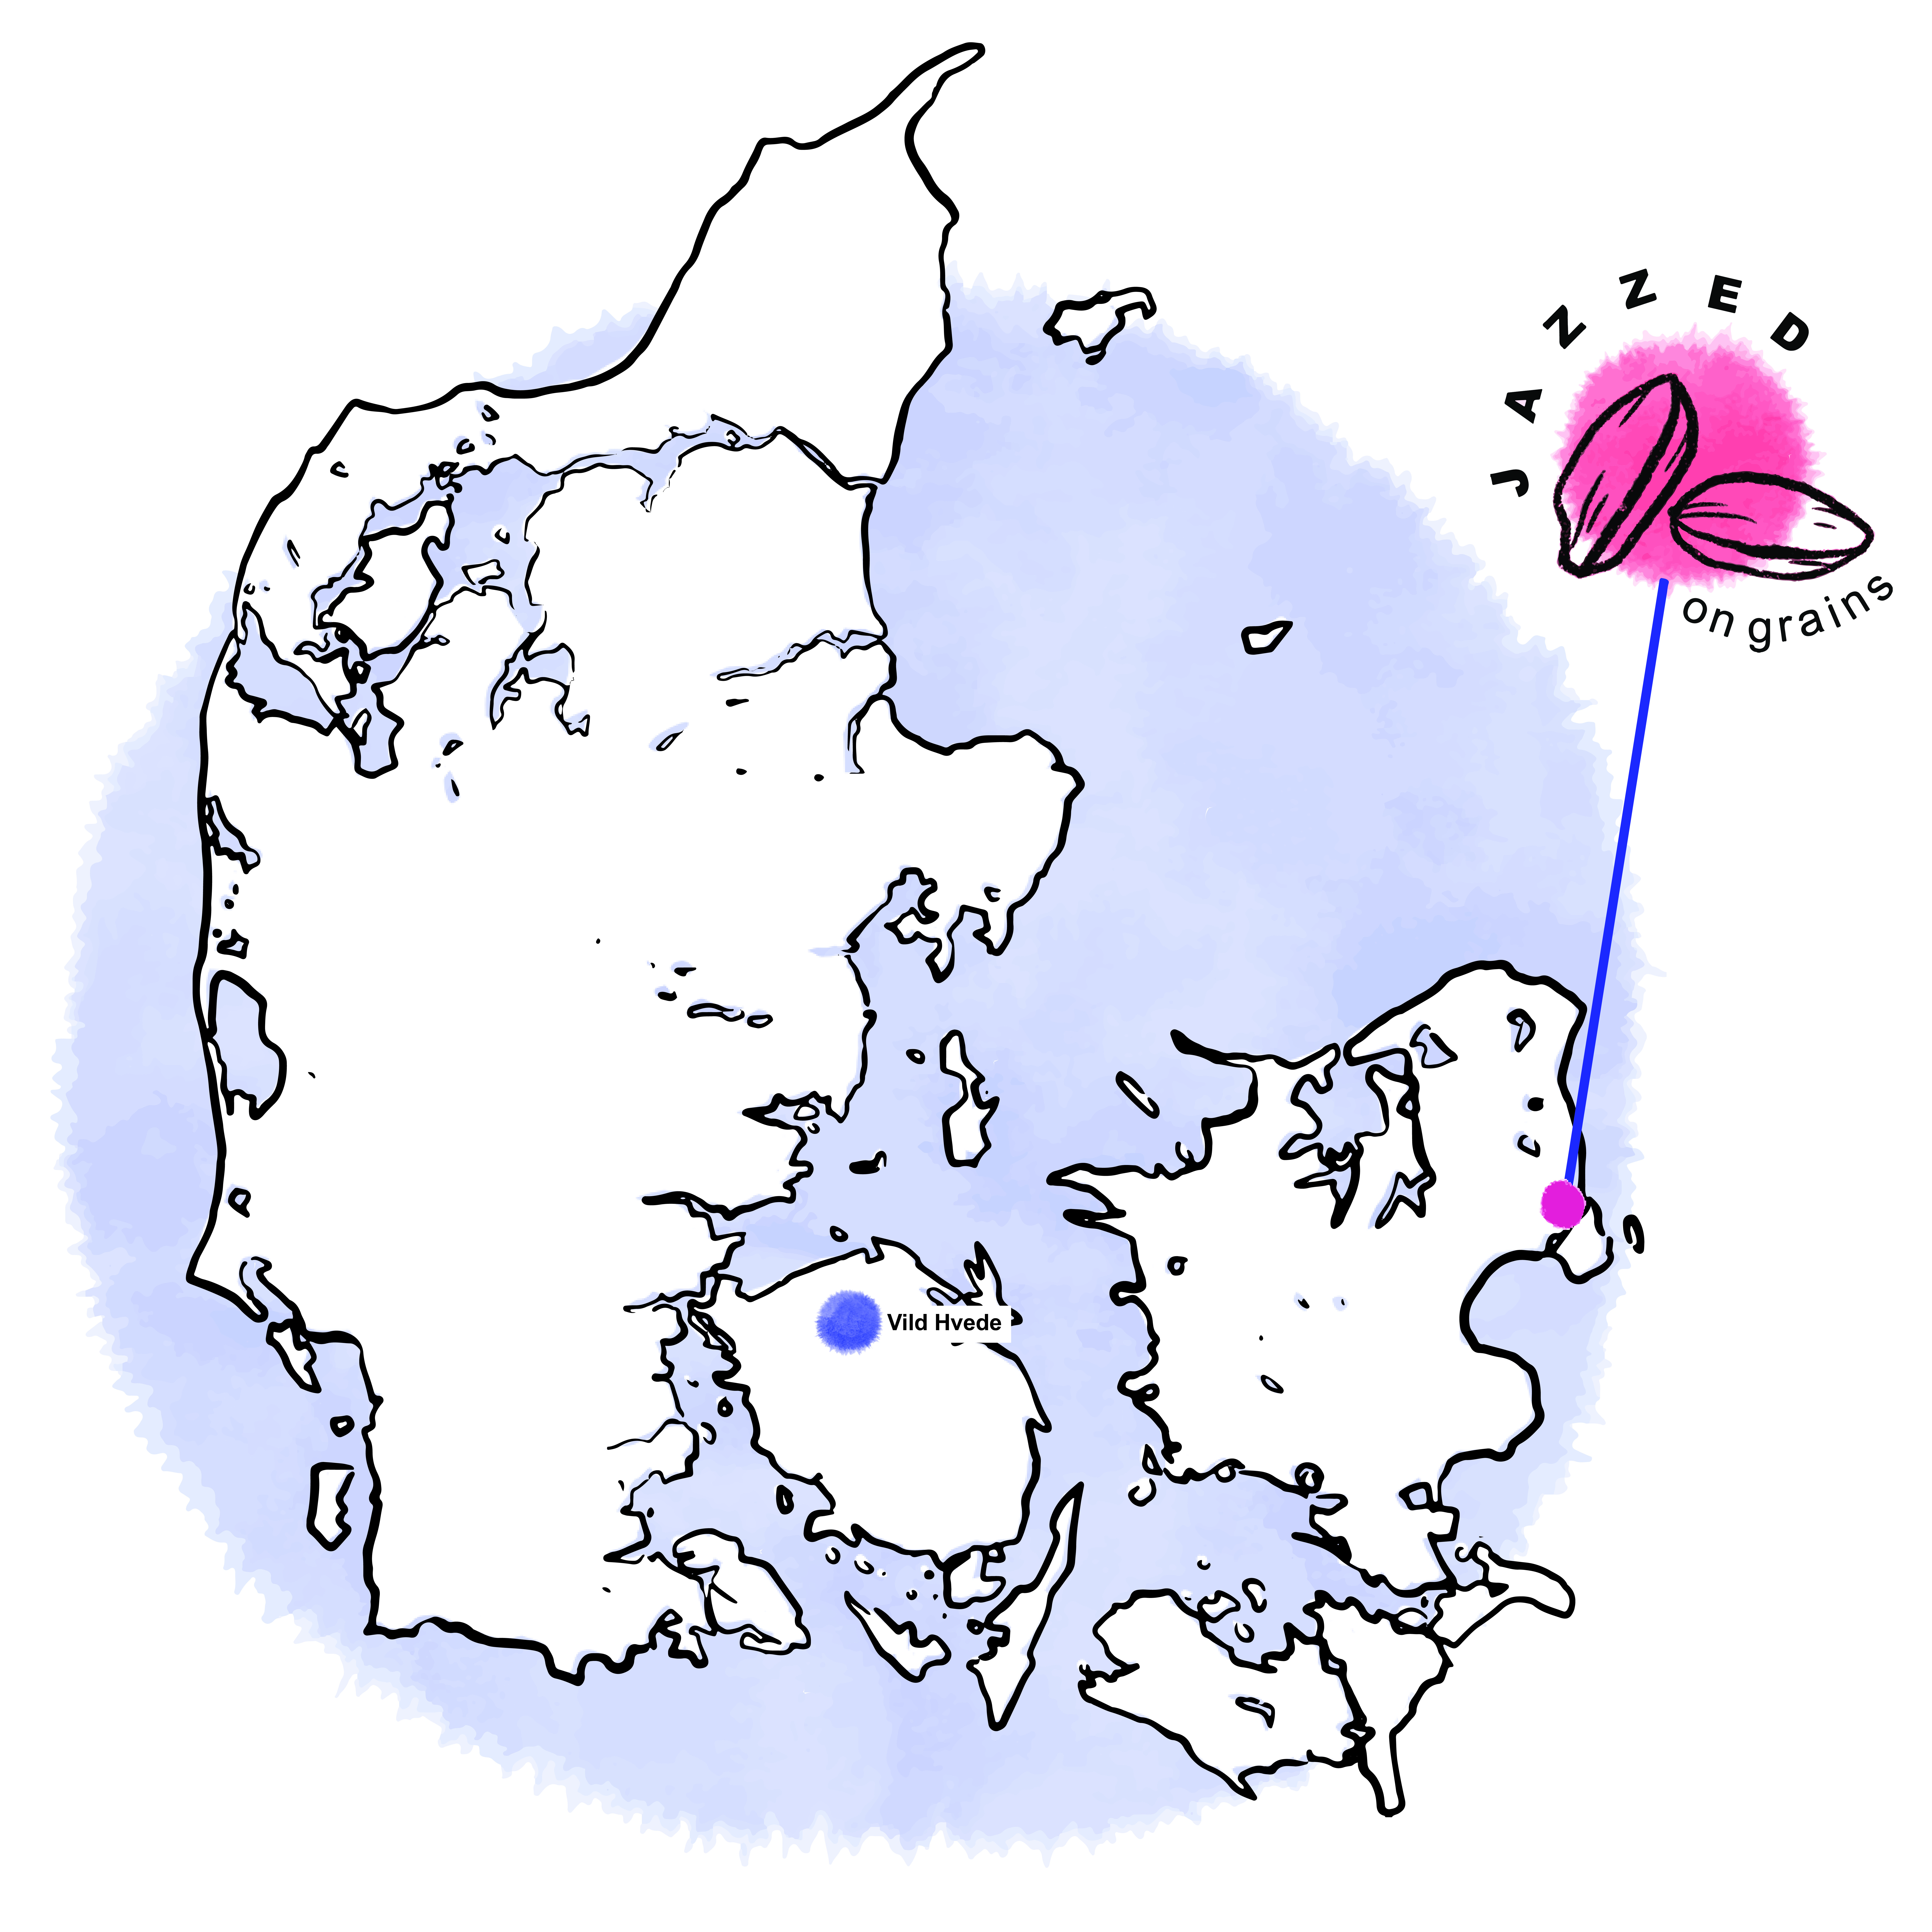 Map of Denmark with two spots marked, one on Fyn and one in Copenhagen. The one in Copenhagen is Jazzed on Grains location, the one on Fyn is Vild Hvede